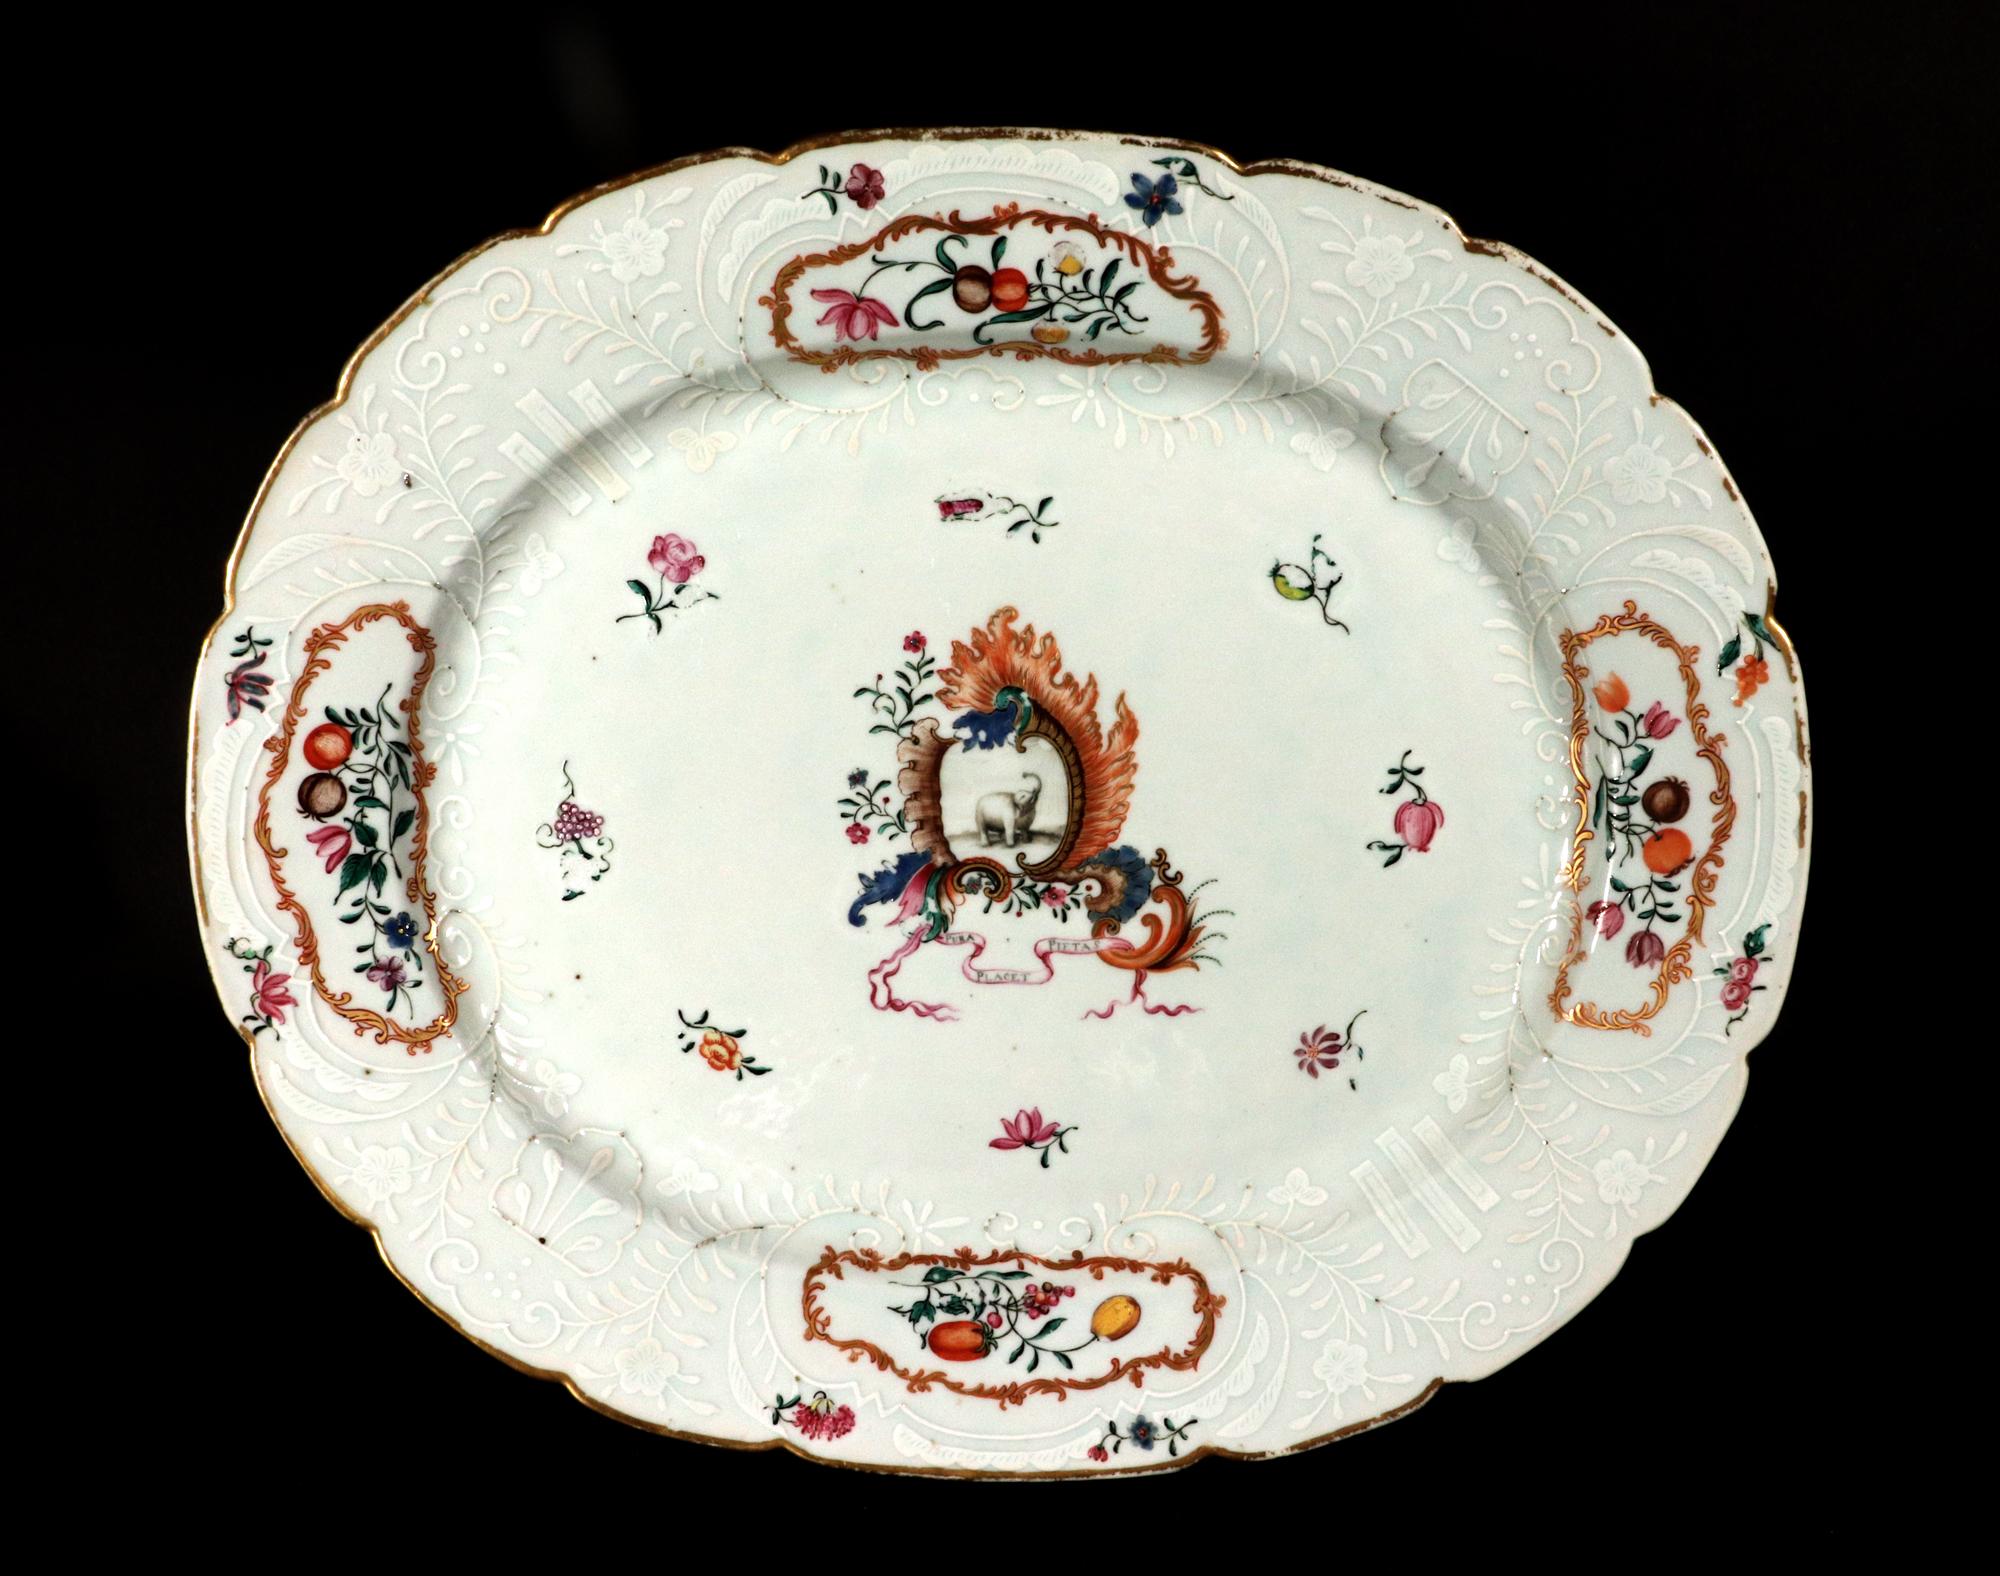 Chinese Export Porcelain Armorial Dish,
Pseudo Continental Arms,
Motto: 